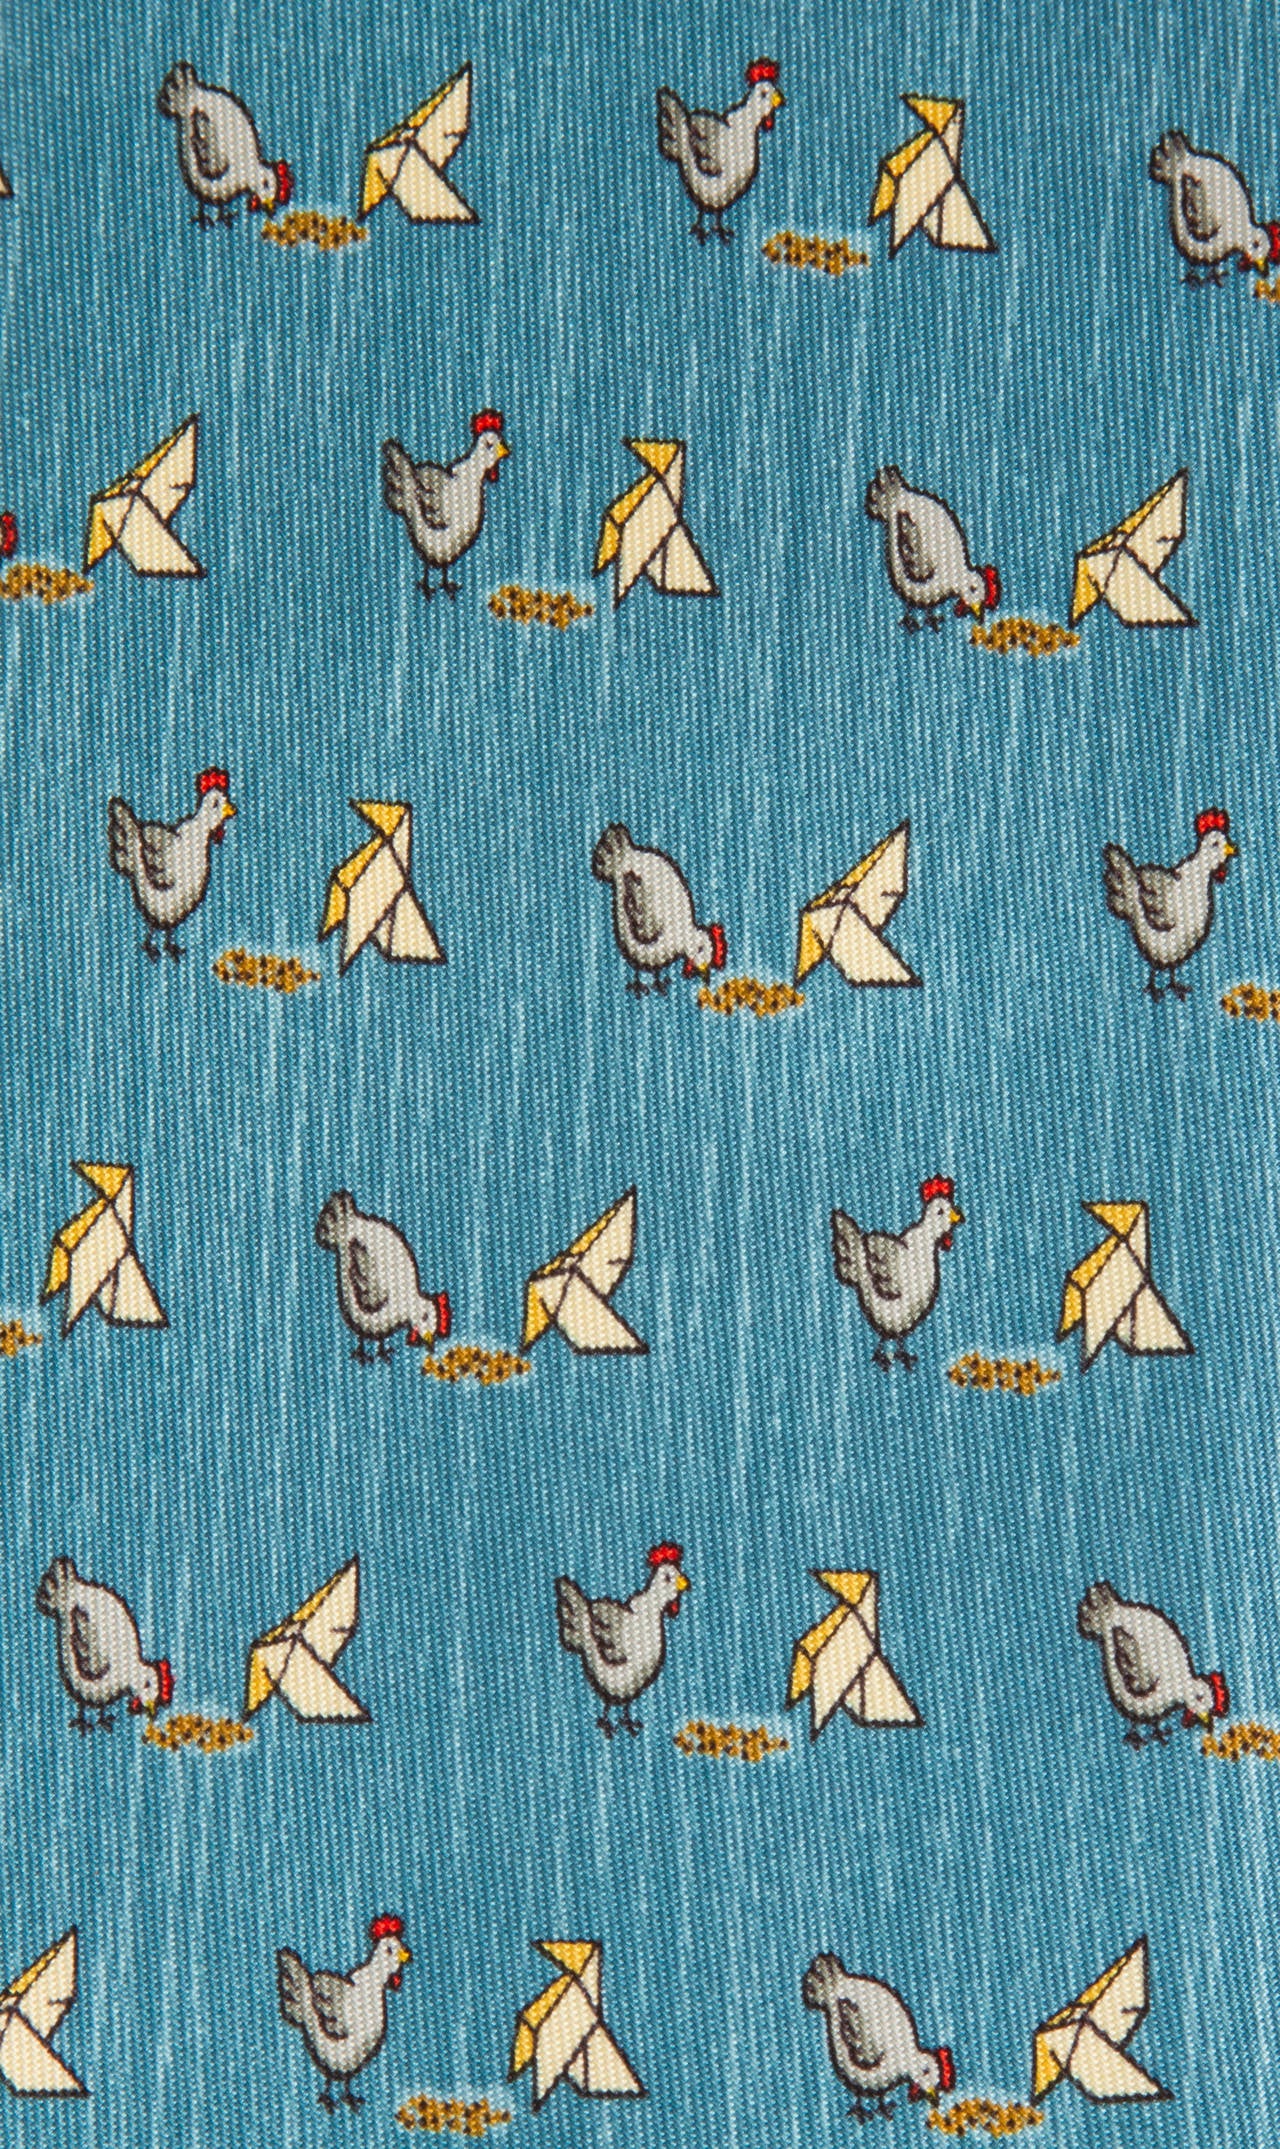 This is a fun and whimsical pattern on a great color blue background.